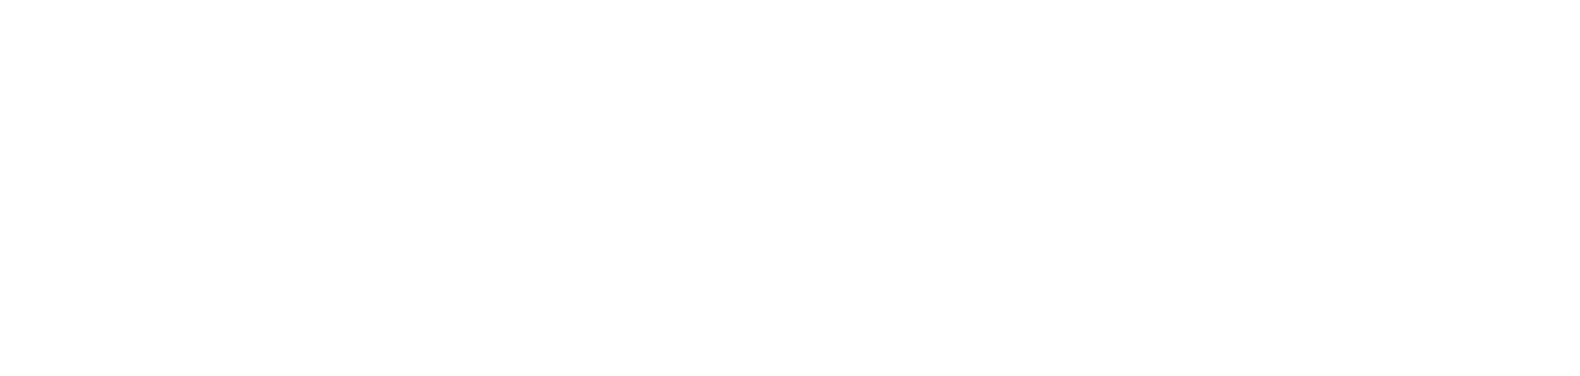 Enerpac Tool Group
 logo large for dark backgrounds (transparent PNG)